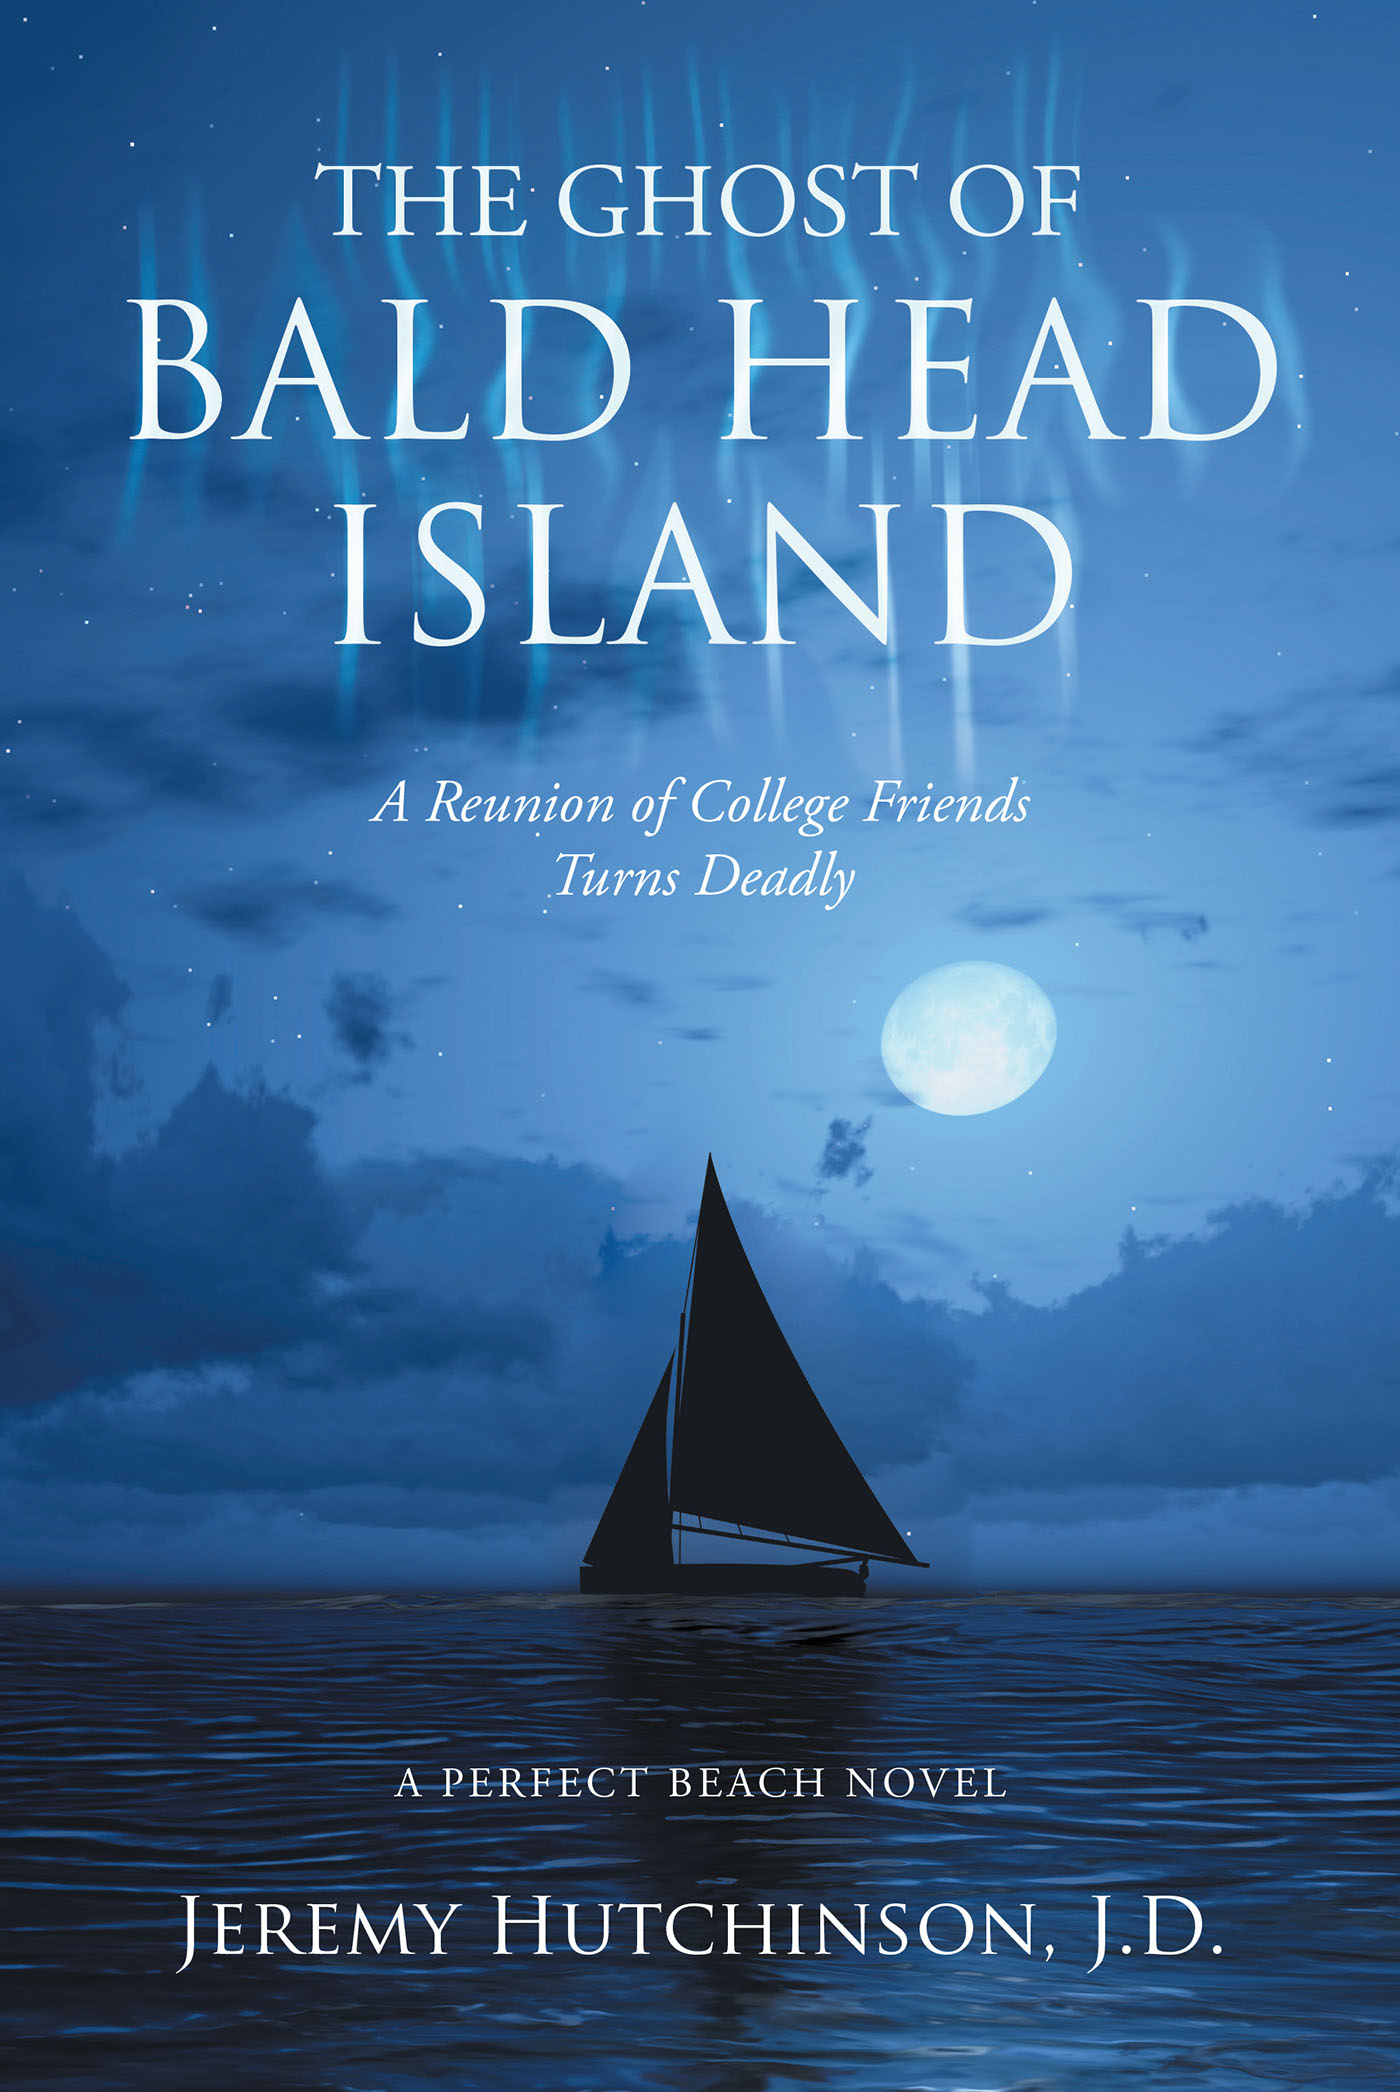 Jeremy Hutchinson, J.D.’s Book, "The Ghost of Bald Head Island," is a Reunion That Starts Fun Until a Murder Takes Place, Throwing Suspicion and Doubt Over the Weekend